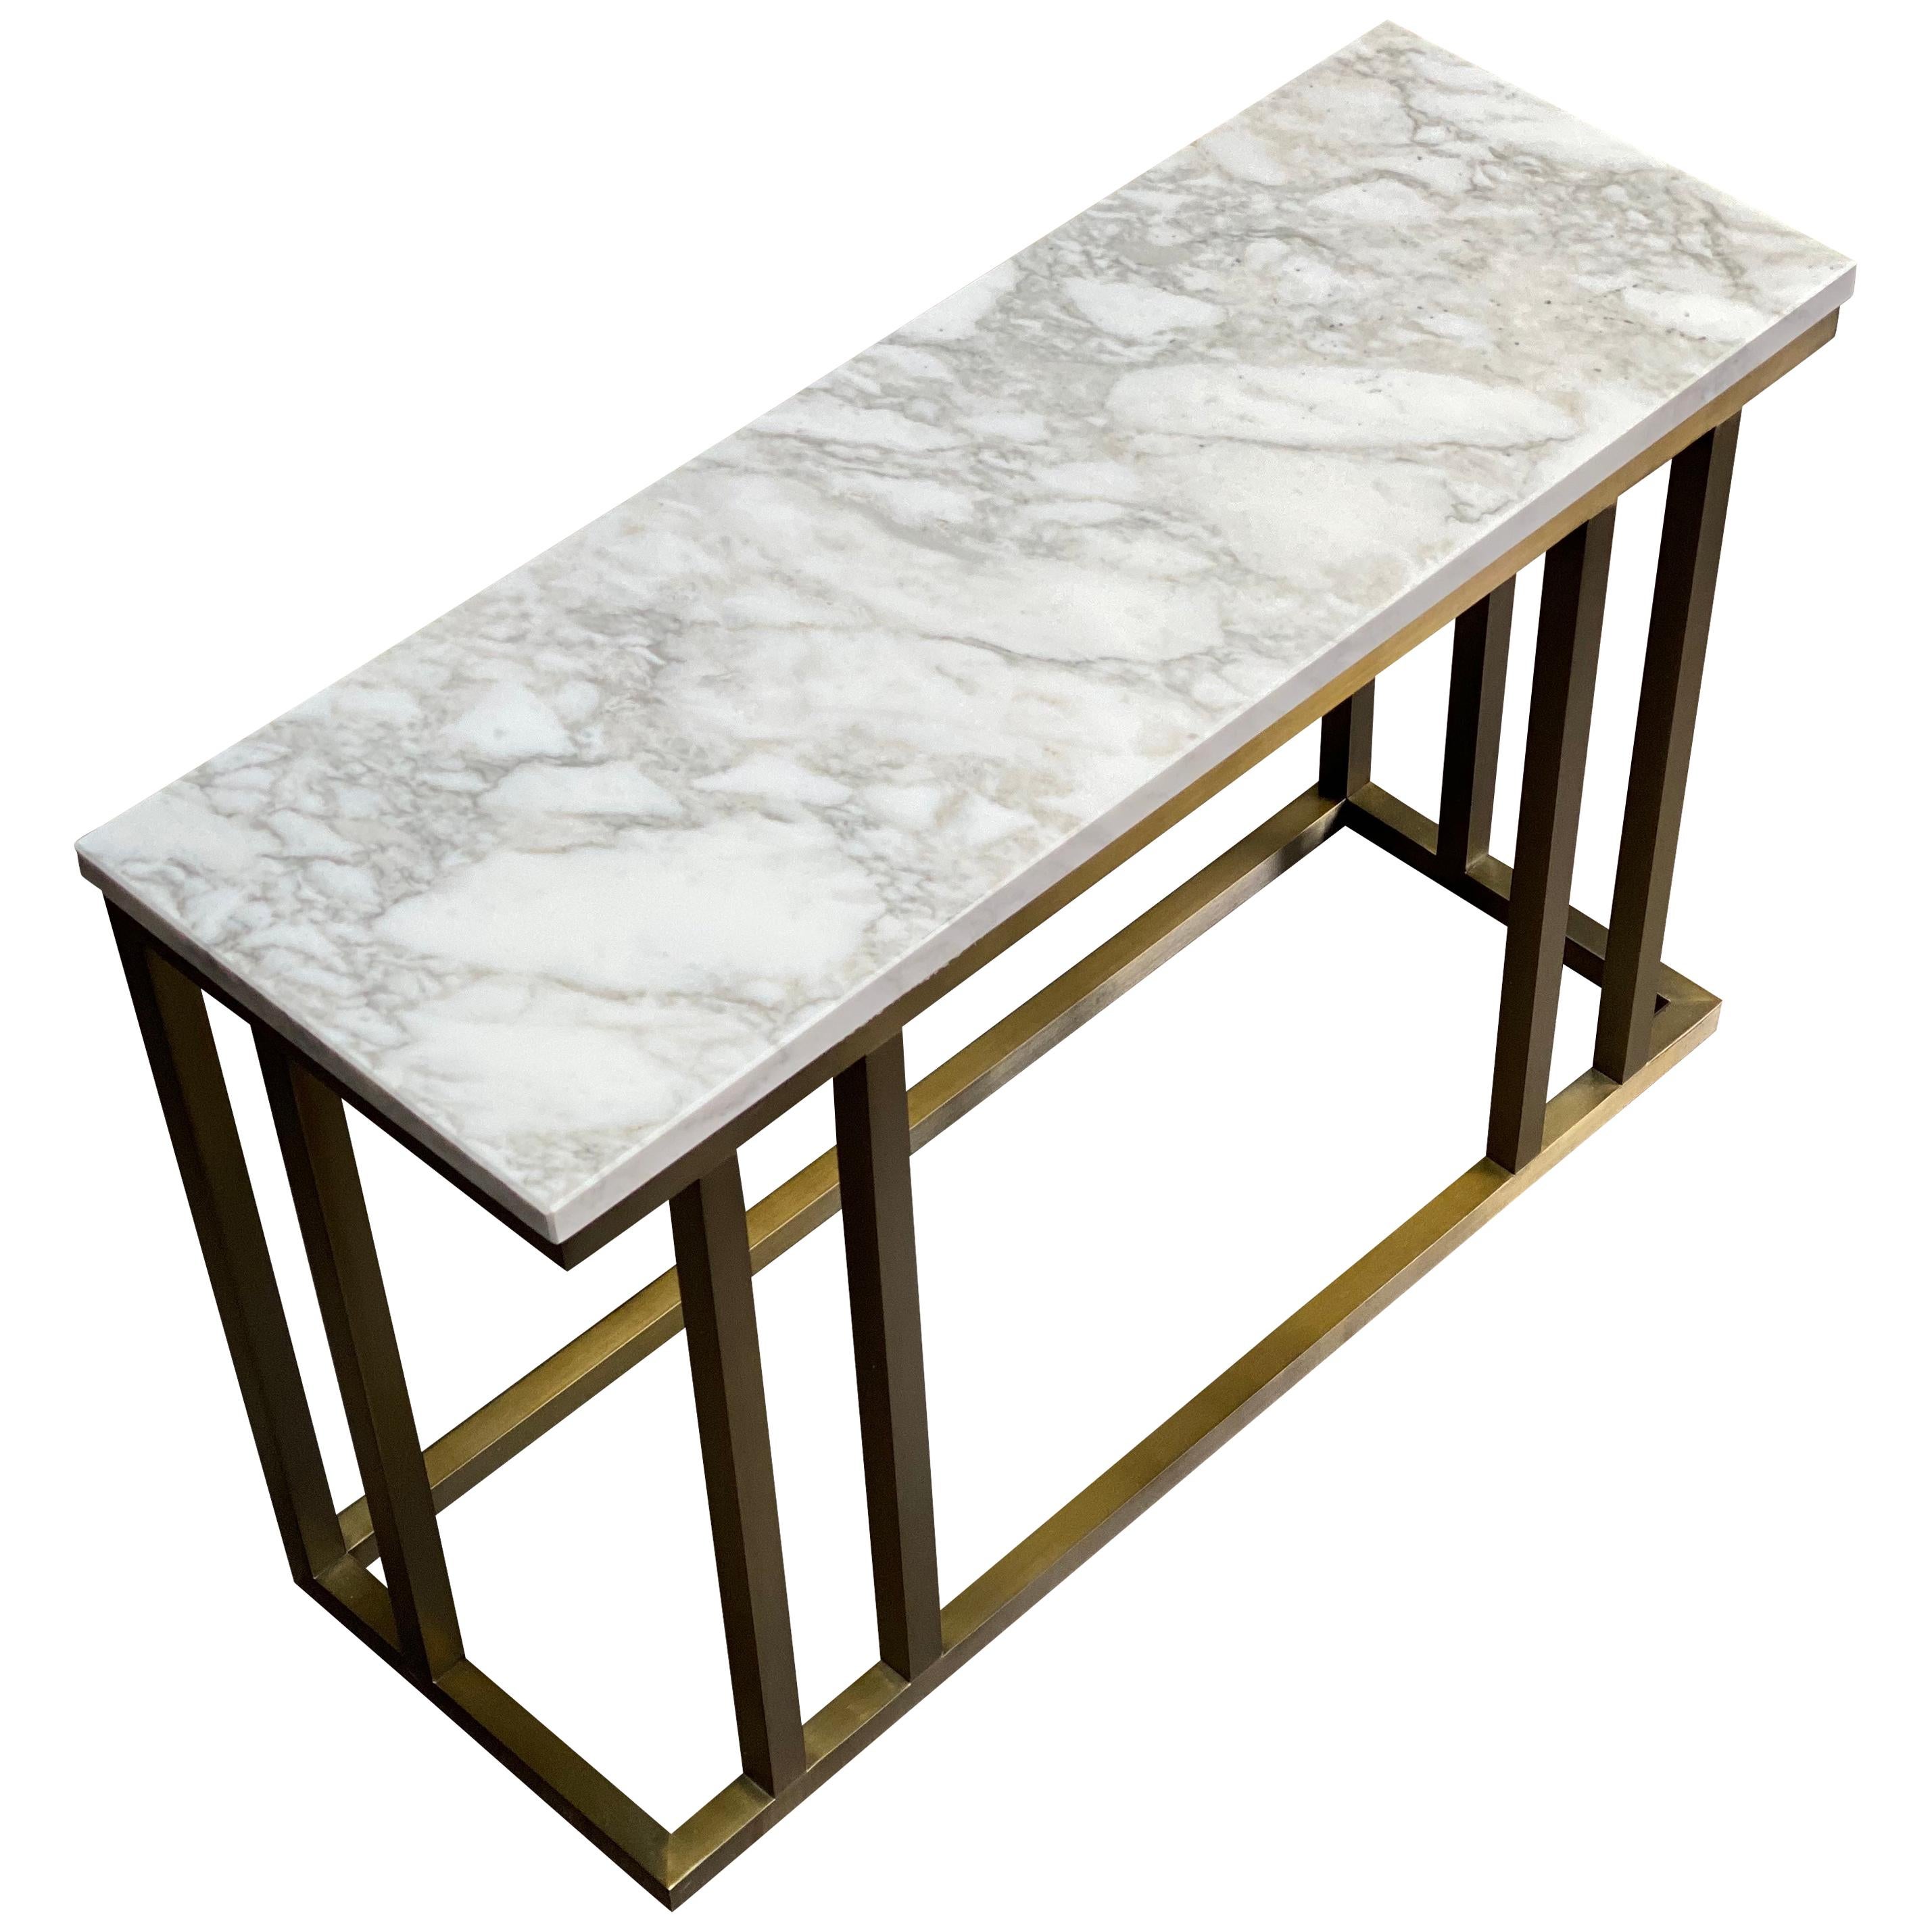 Contemporary Elio Side Table in Arabescato Marble and Antique Brass Finish